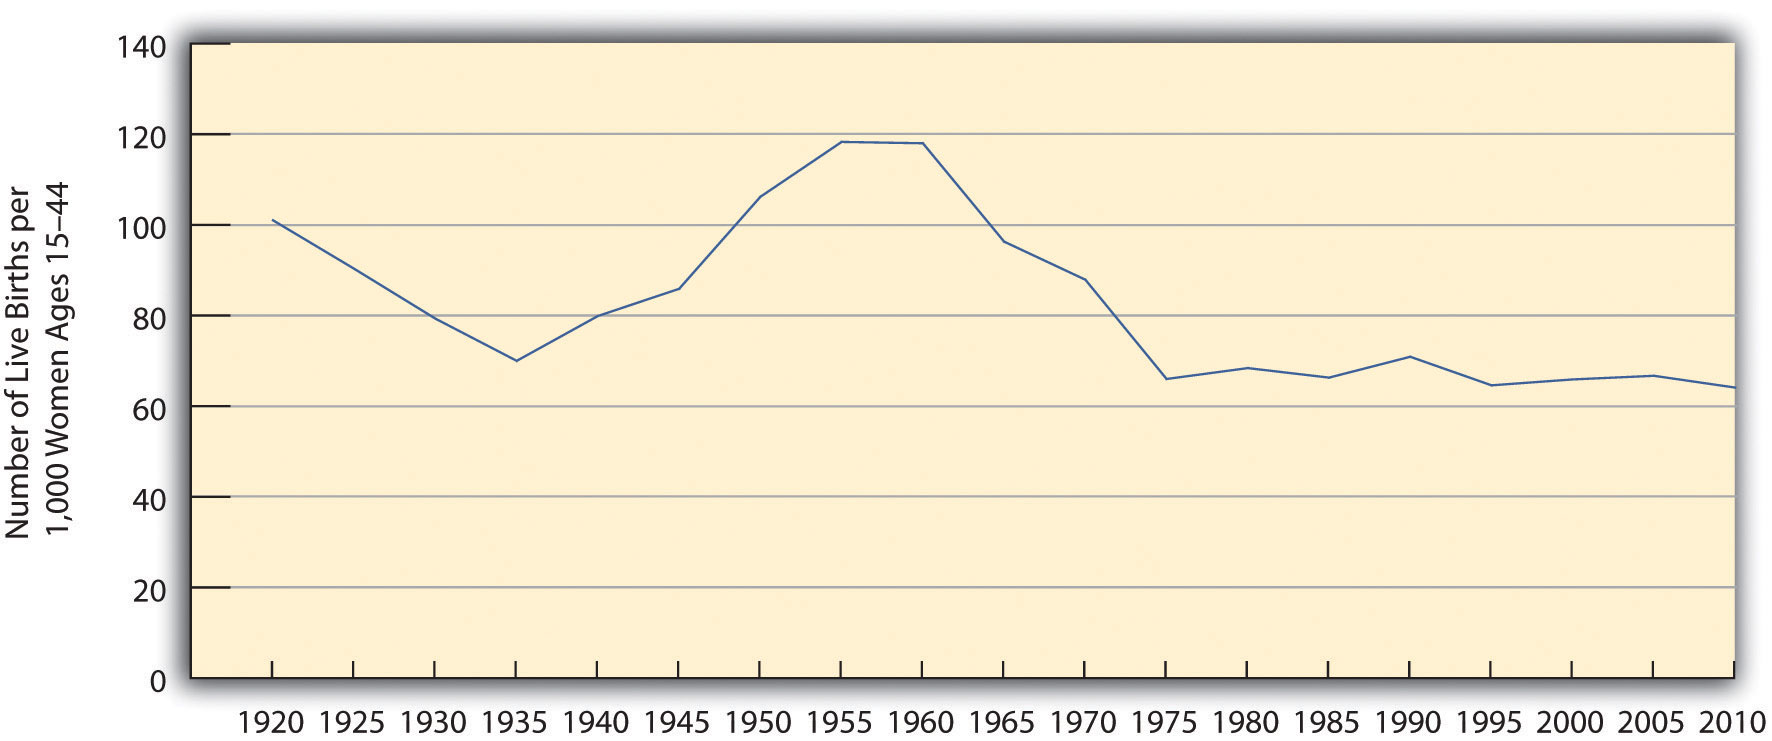 US General Fertility Rate. The graph decreases from 1920 to 1935, then increases until 1960. From there it falls again until 1975, then essentially plateaus until 2010